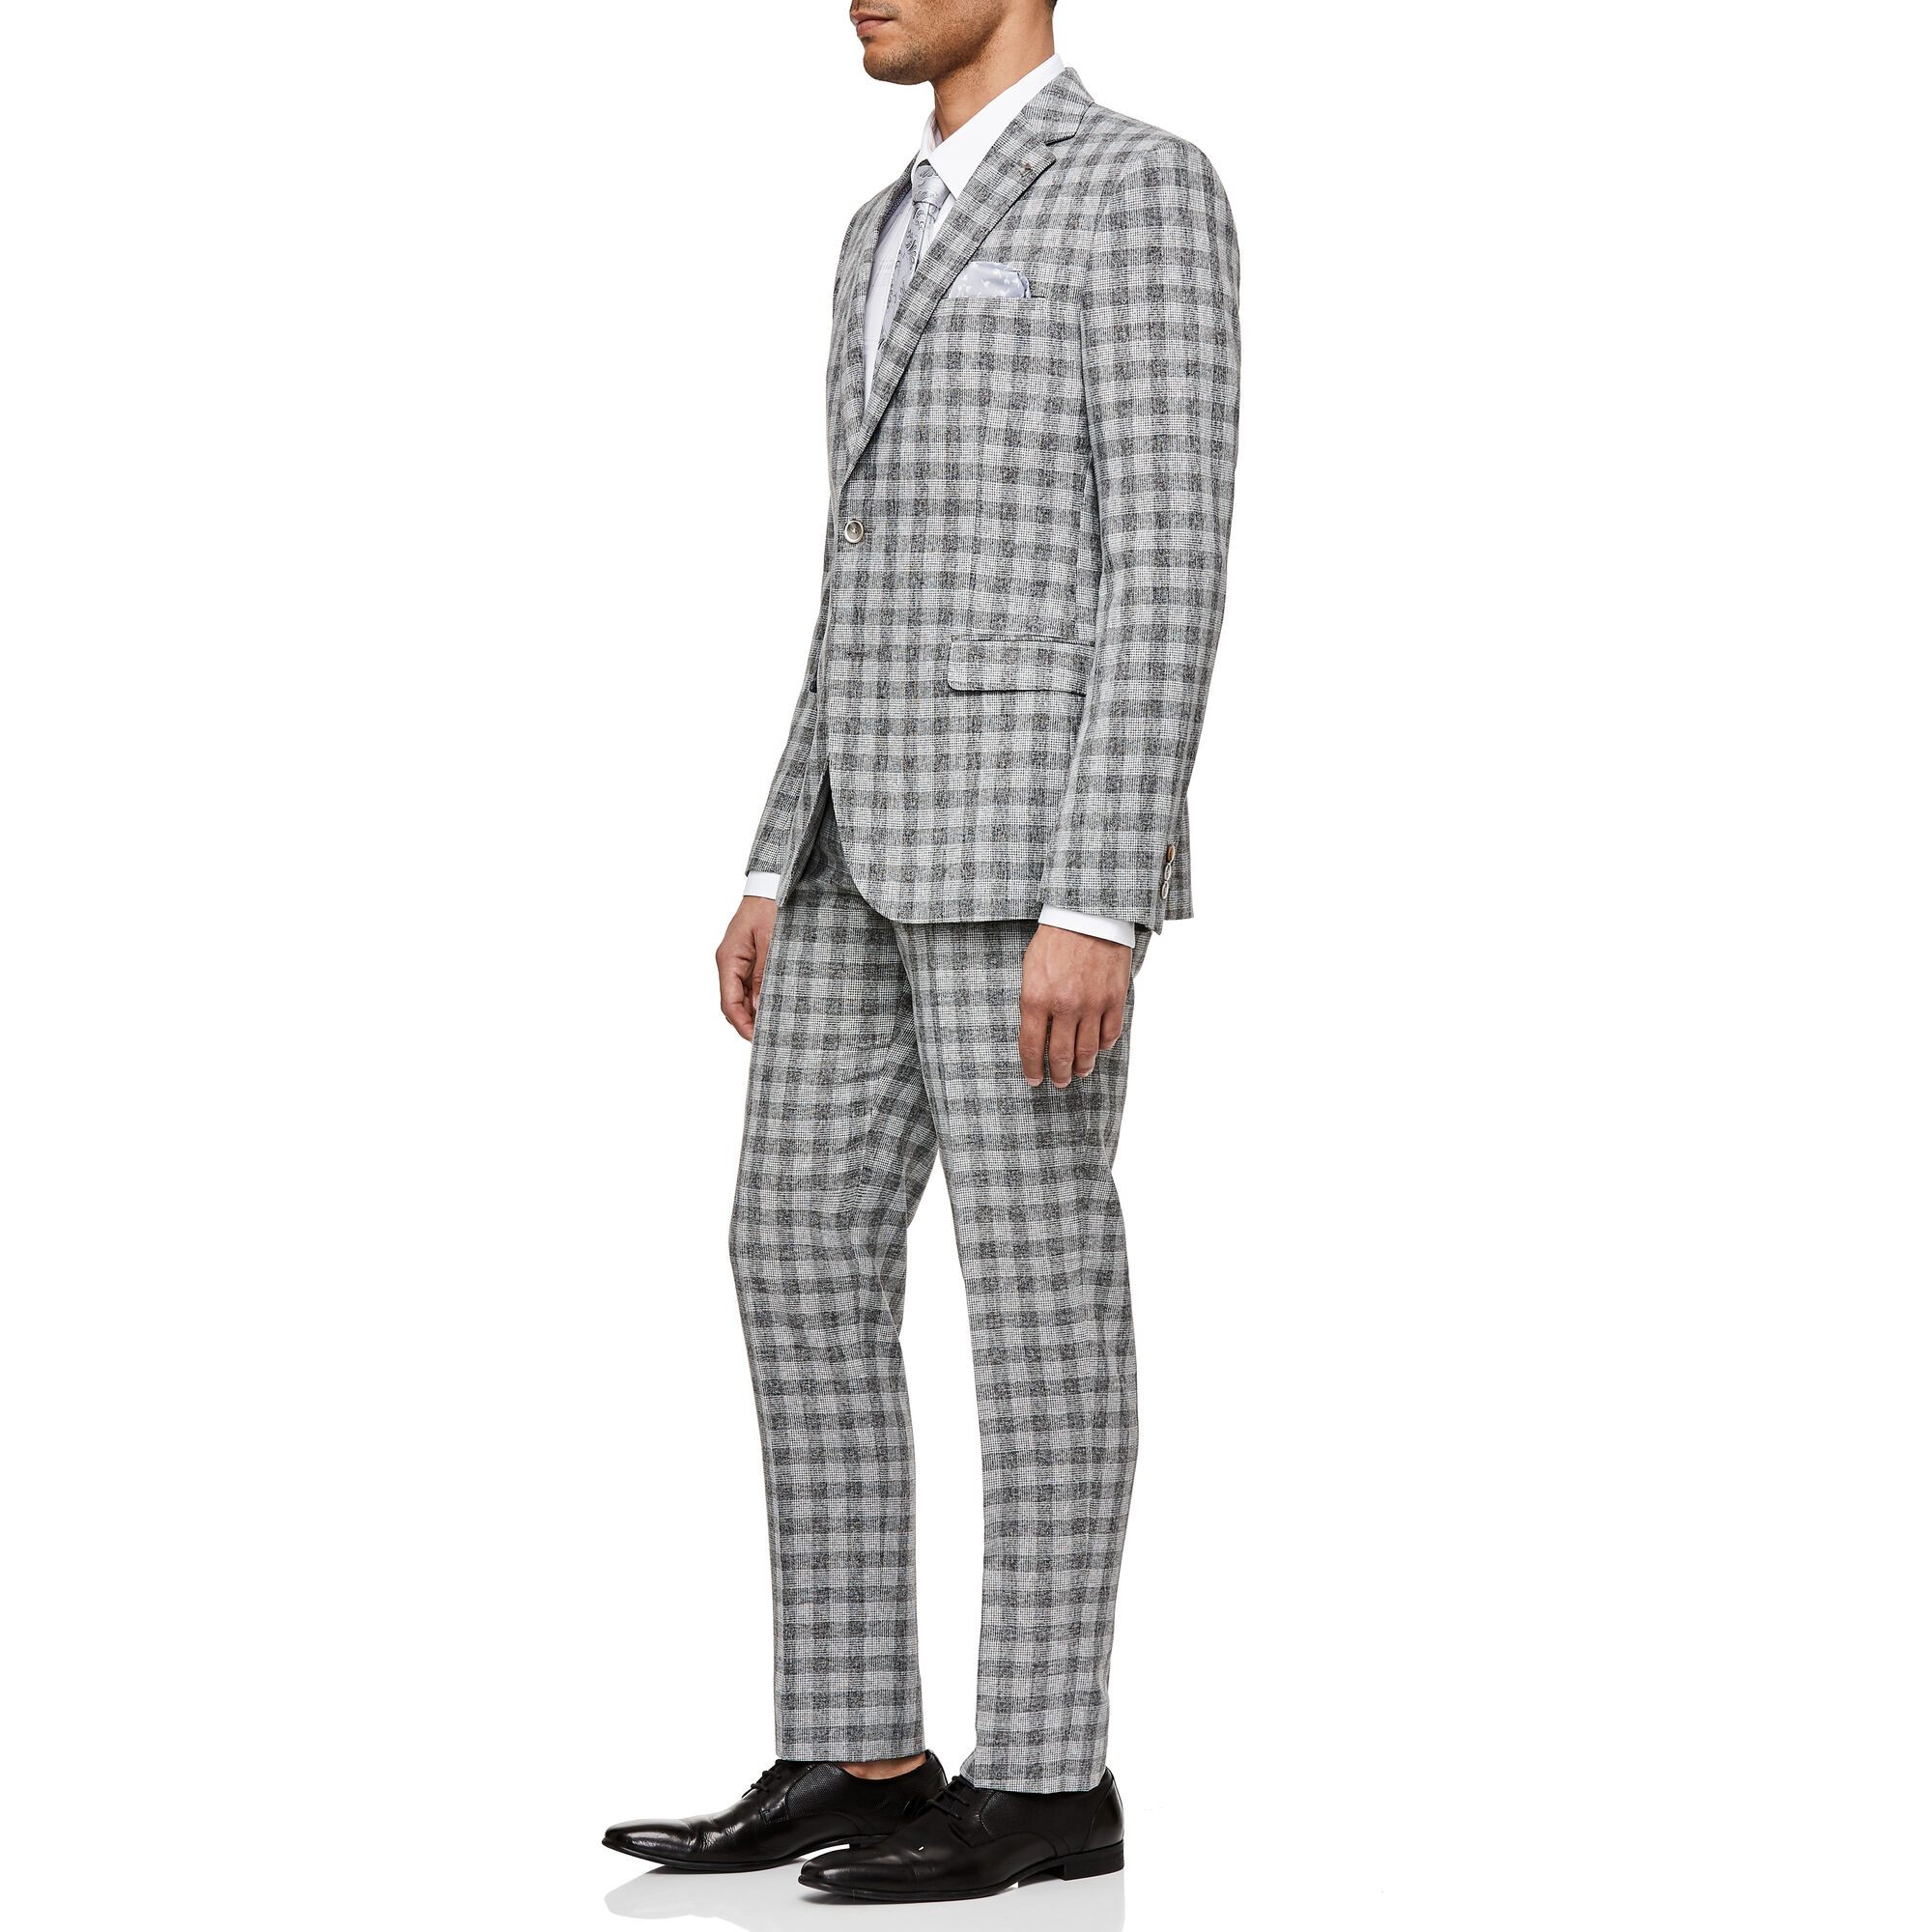 Zanetti - Grey Check - Slim Fit Fully Lined Plaid Suit | Suits | Politix